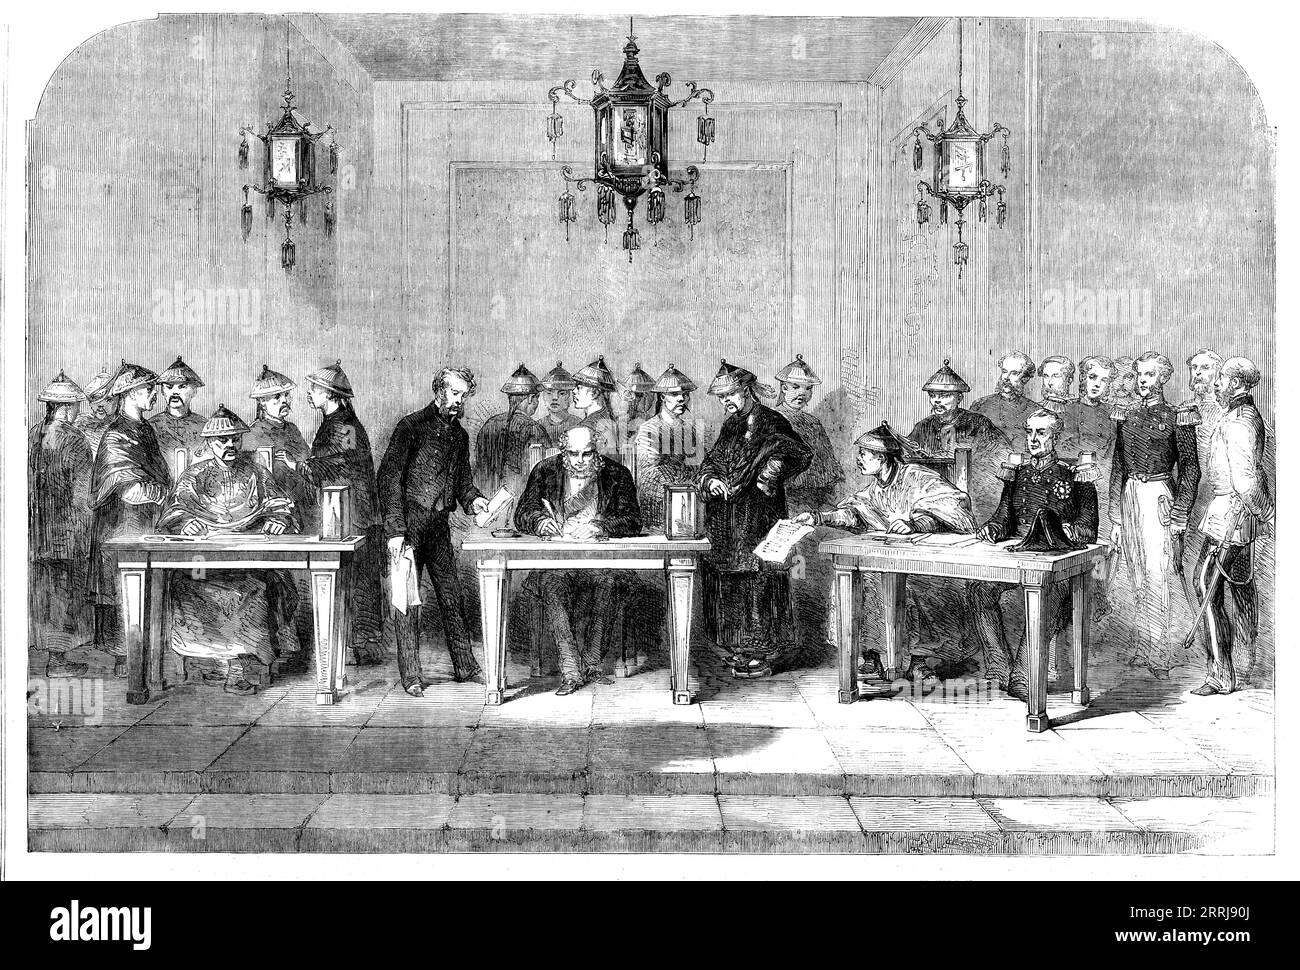 Signing of the Treaty between England and China at Tien-tsin on June 26, 1858, (1858). 'Hwa-Sha-Na; the Earl of Elgin, Kwei-Leang; Admiral [Sir Michael] Seymour...the ceremony of signing the treaty just concluded between the Government of her Majesty and the Emperor of China...at Ya-mum, called Hai-Kwang She...[was] important not only as terminating months of bloodshed and misery, but also, in all probability, as ushering in a brighter period for the future of this unique and wonderful empire...At our arrival the troops filed in and took up their position...the band struck up the National Anth Stock Photo